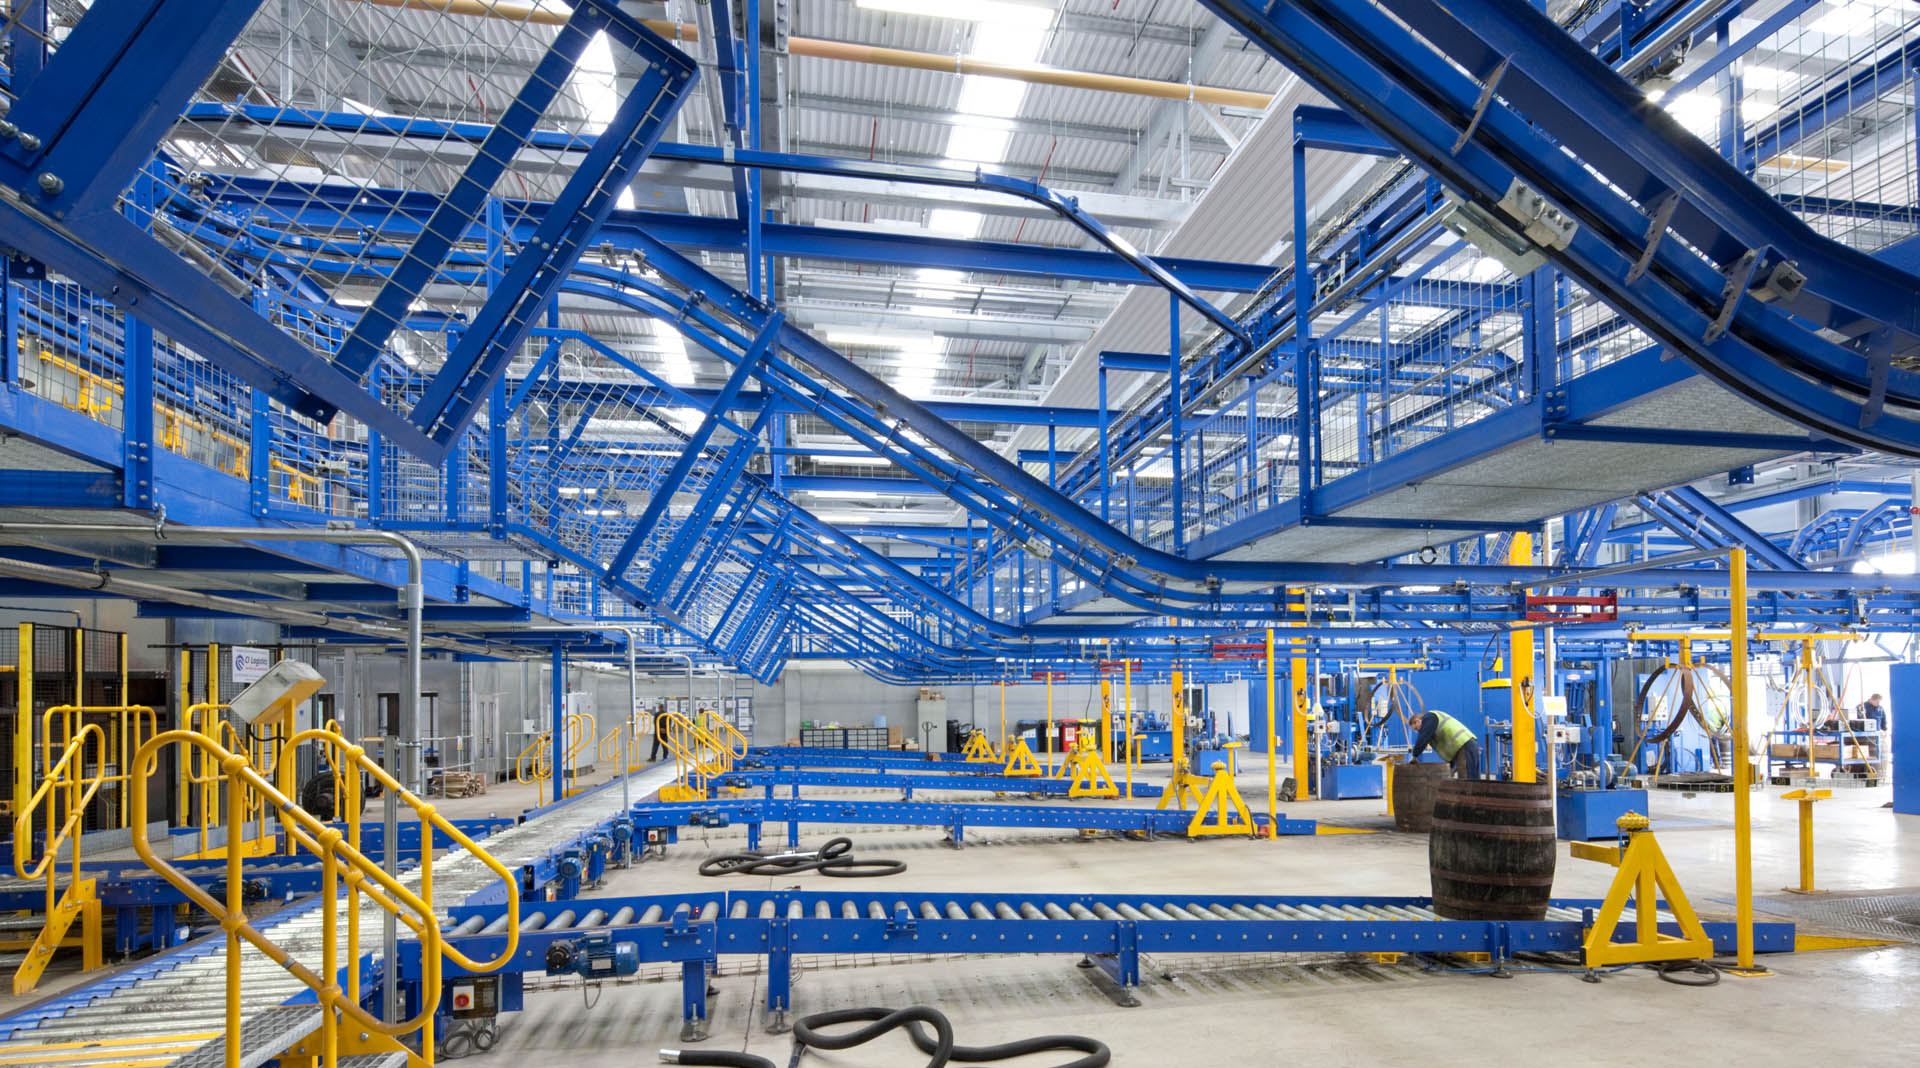 High-tech manufacturing and production sector construction services | ISG